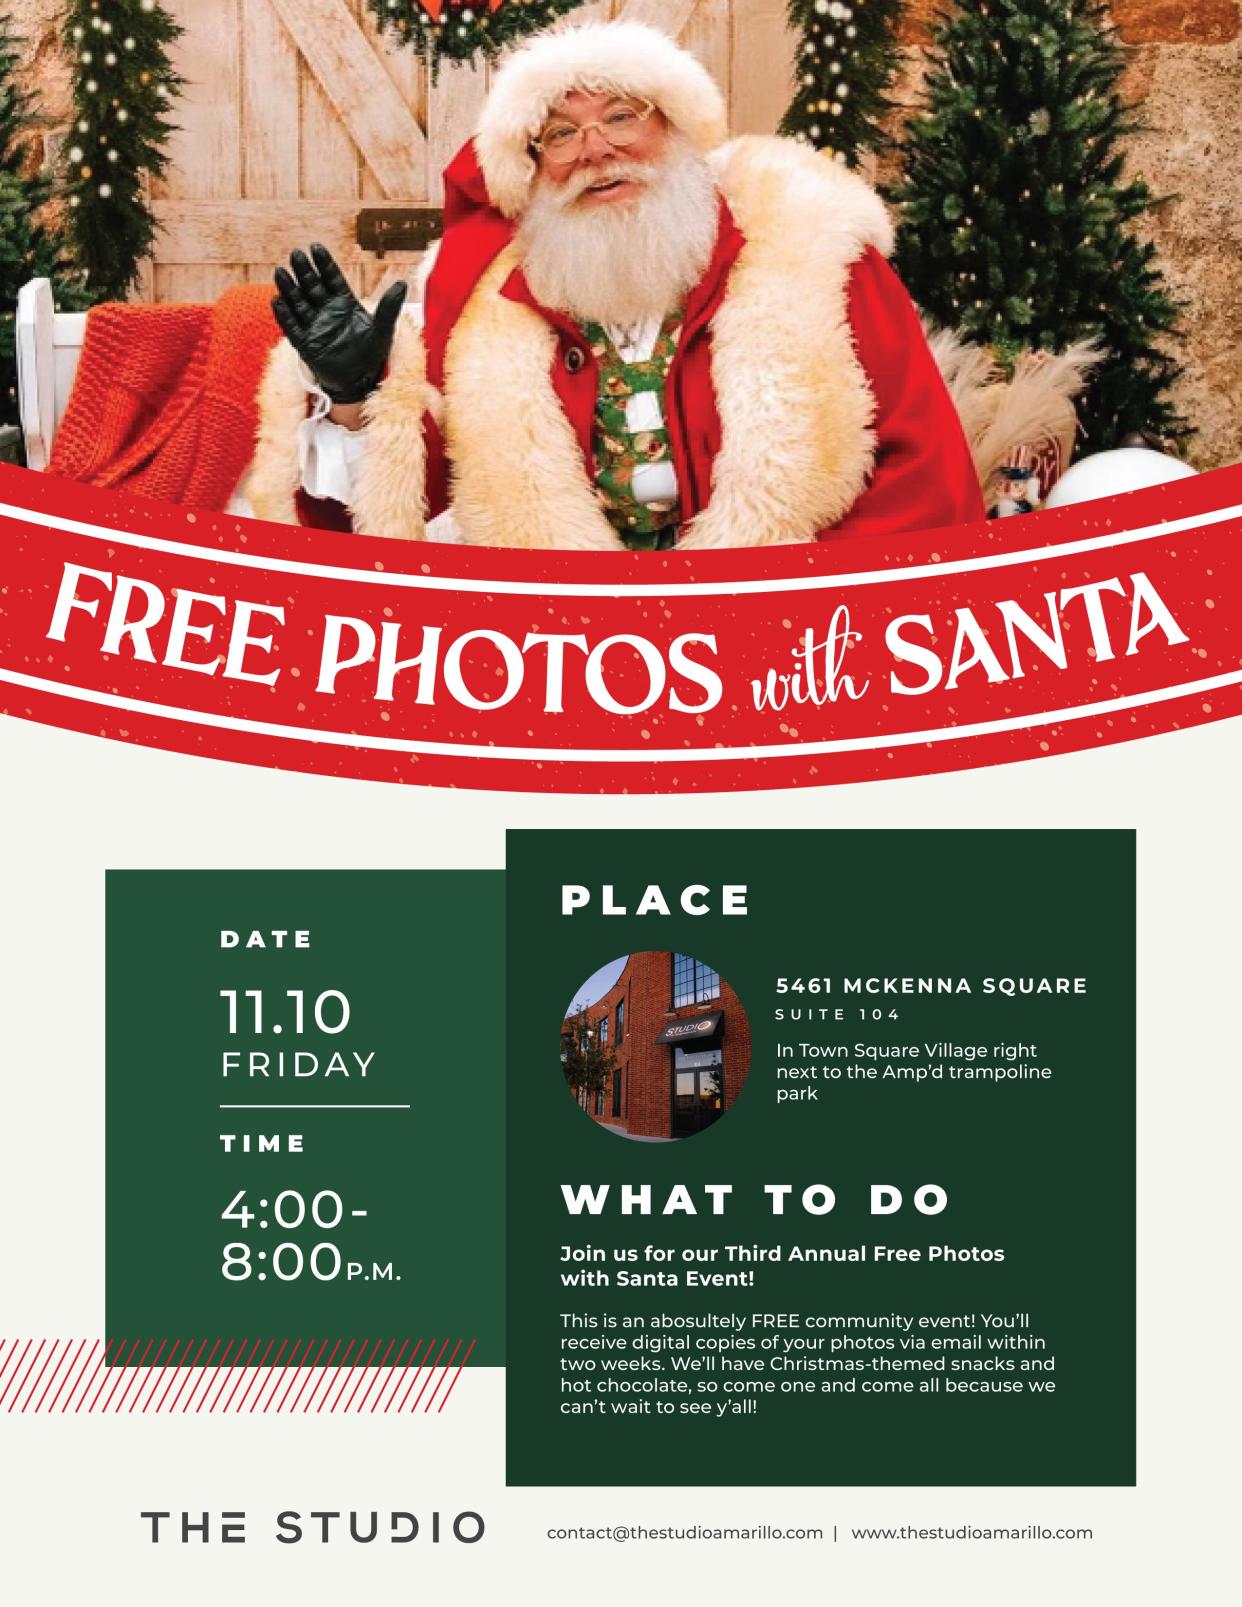 On Friday, Nov. 10, the Studio is hosting its Third Annual Free Photos with Santa event in Town Square Village in Amarillo.